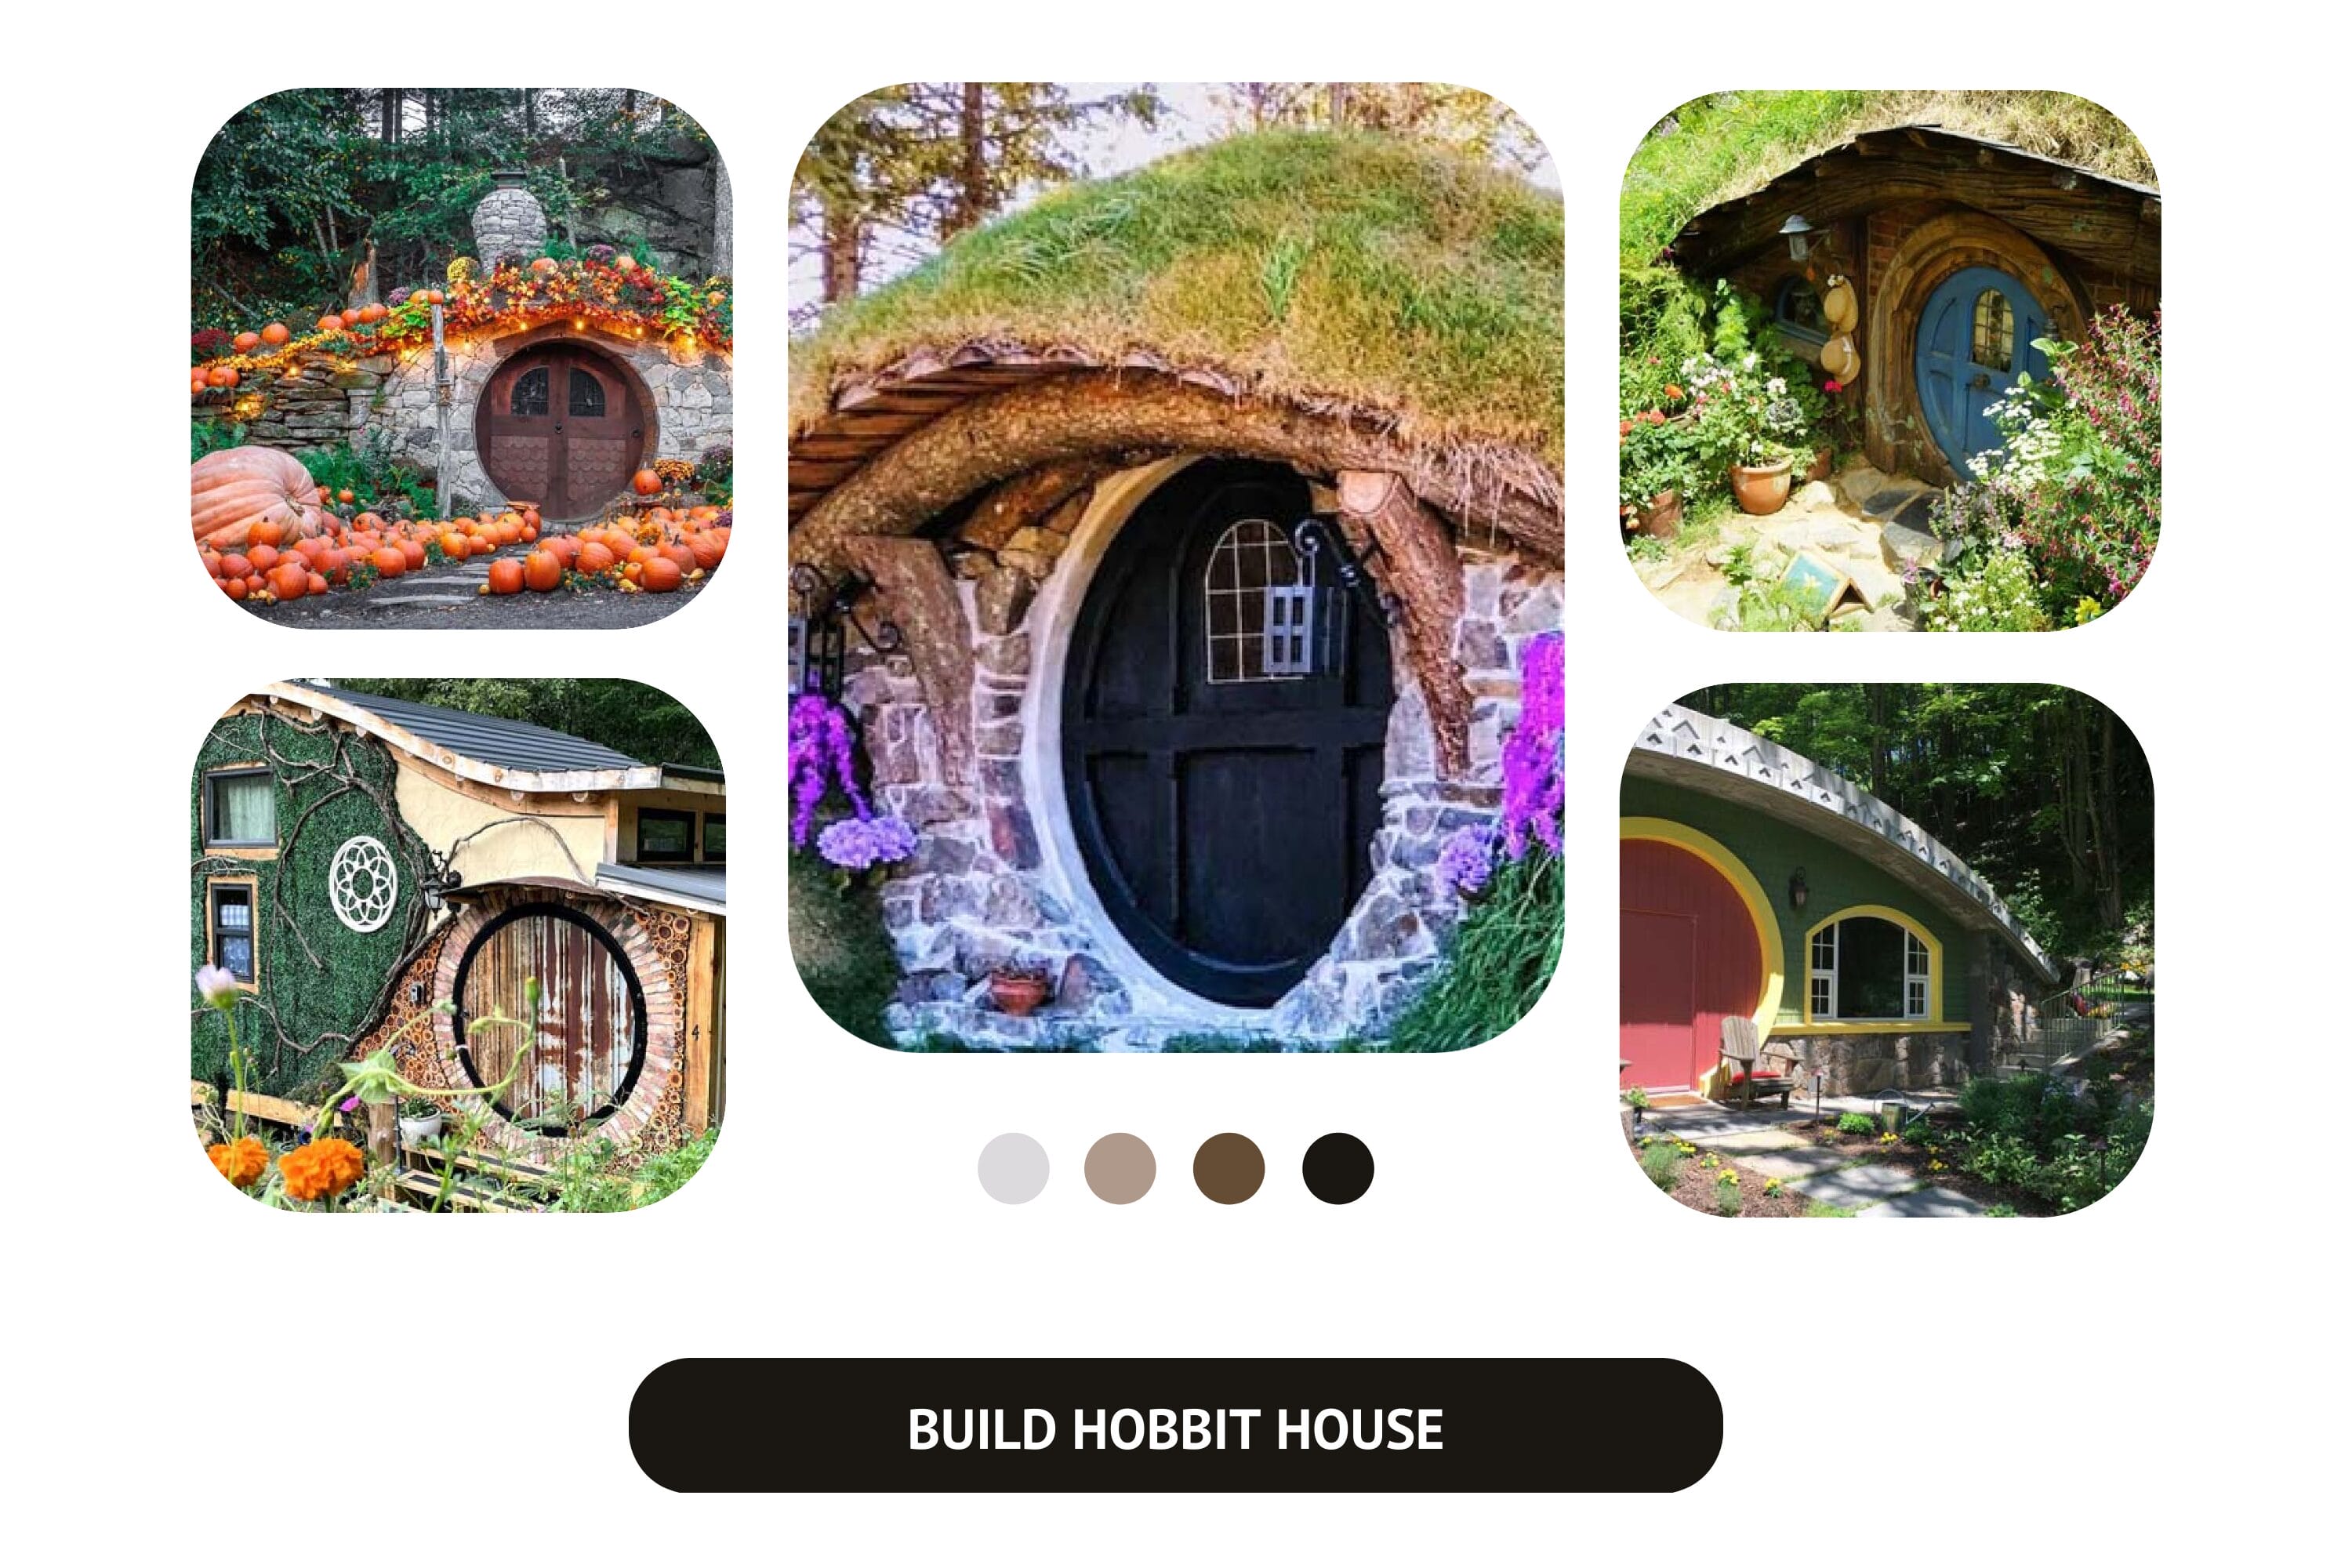 I want to create a charming hobbit-style house.